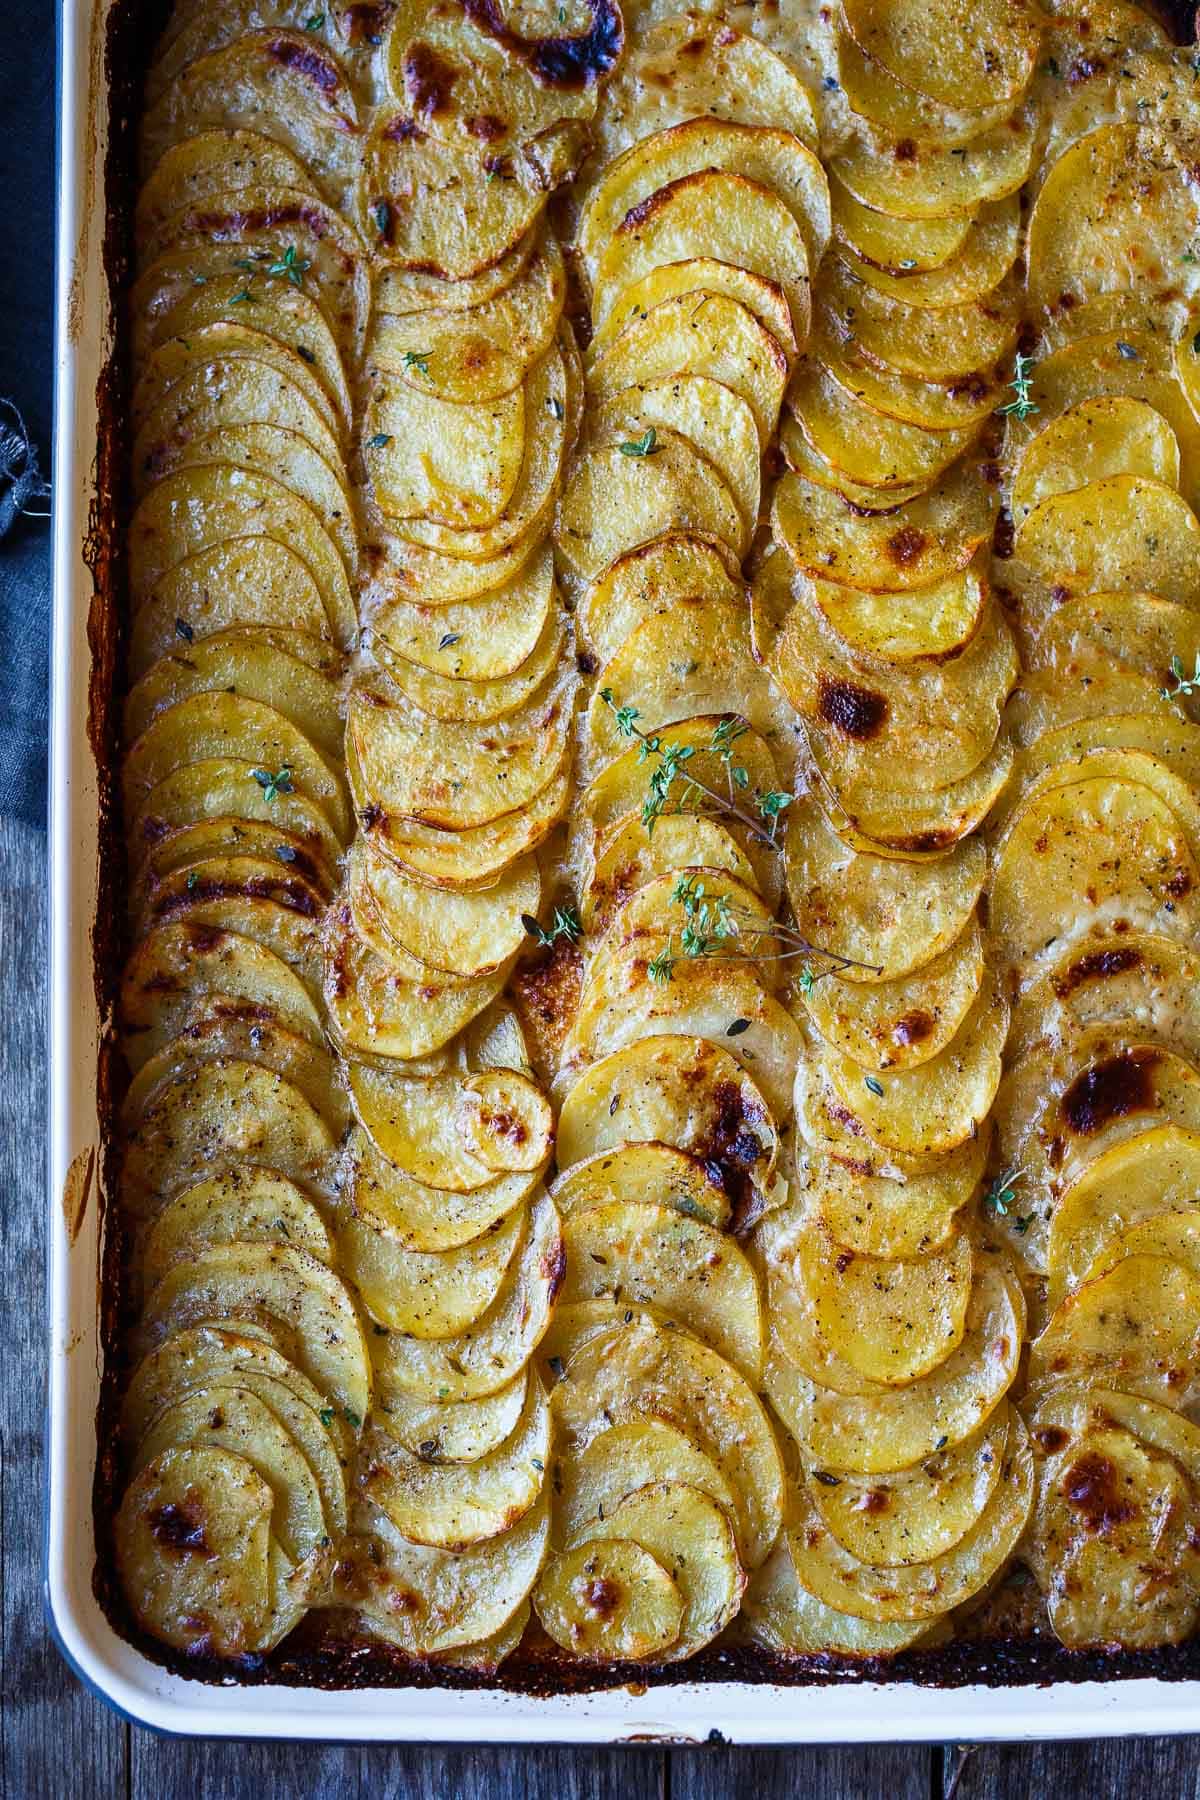 The Easiest Scalloped Potatoes